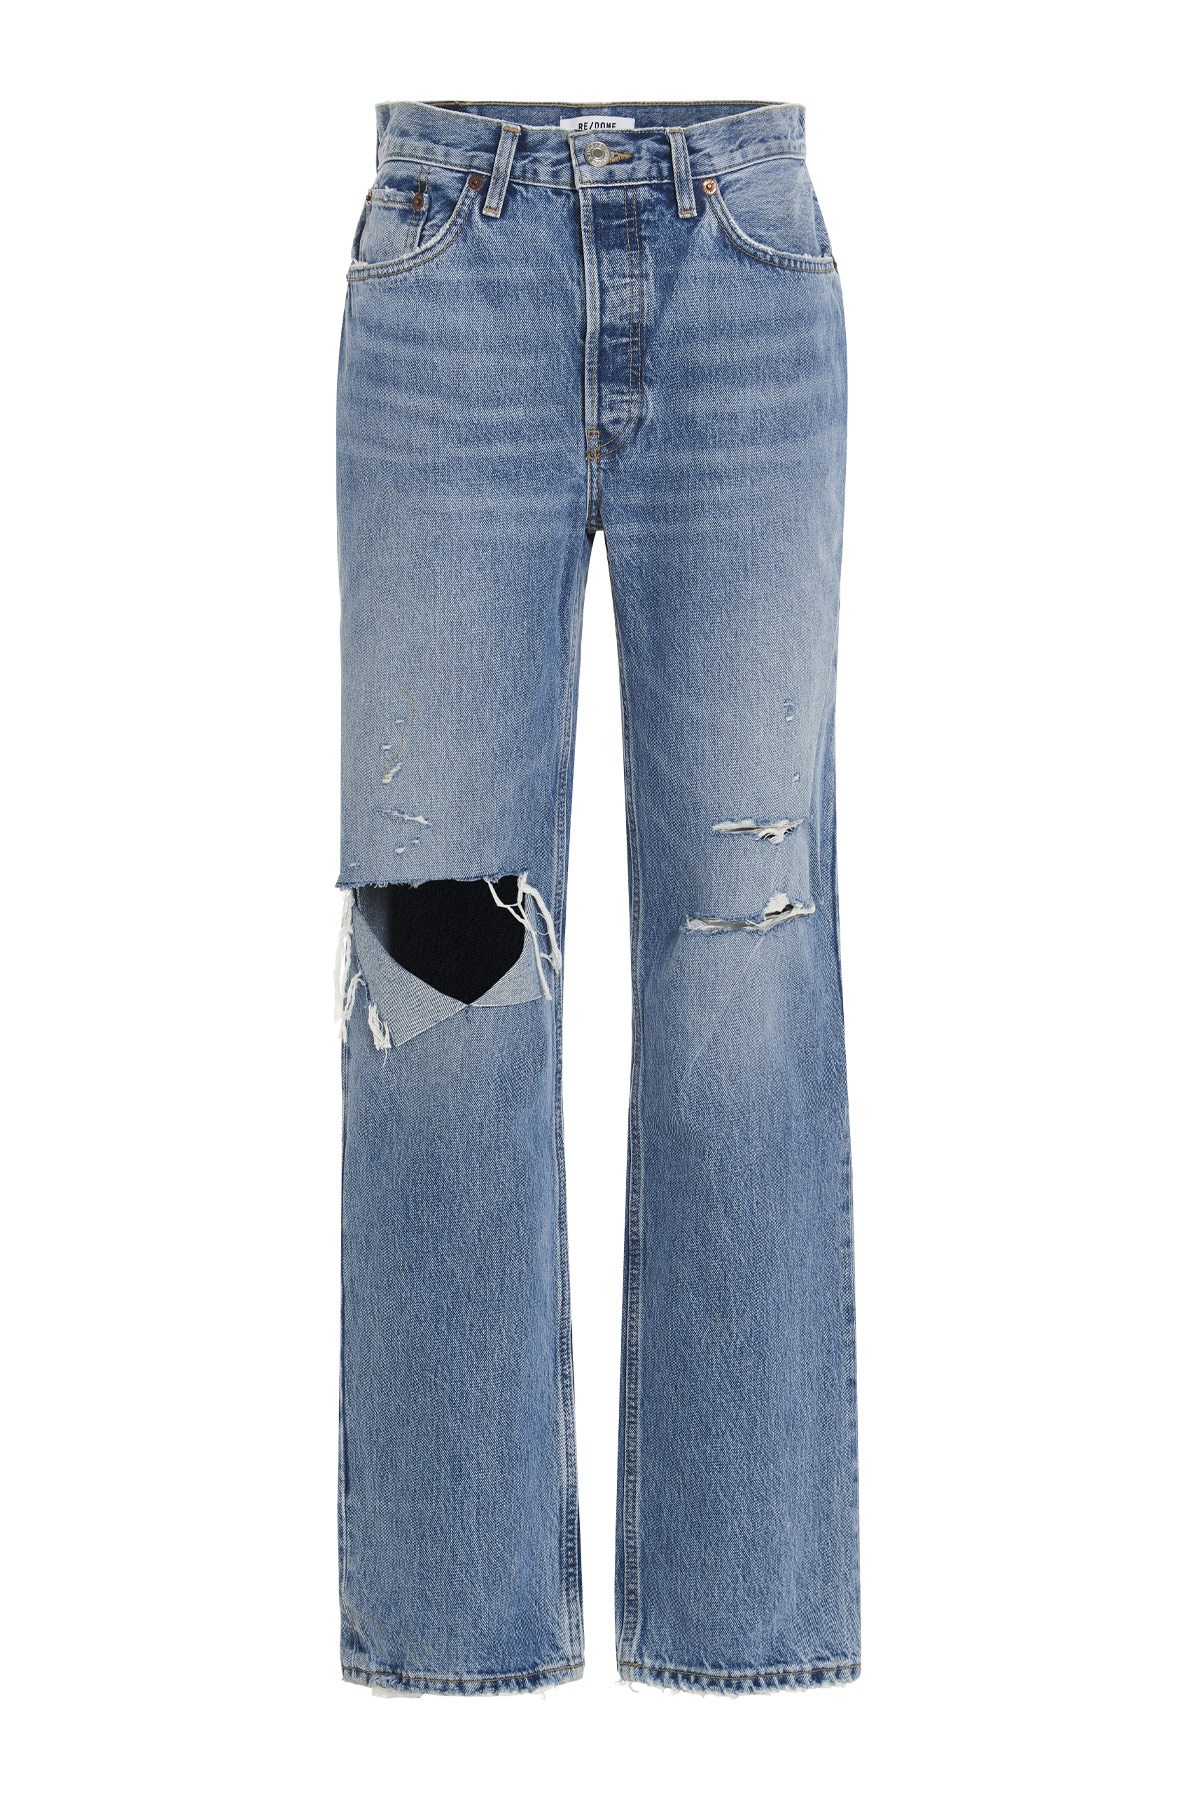 RE/DONE '90S Comfy Jean’ Jeans